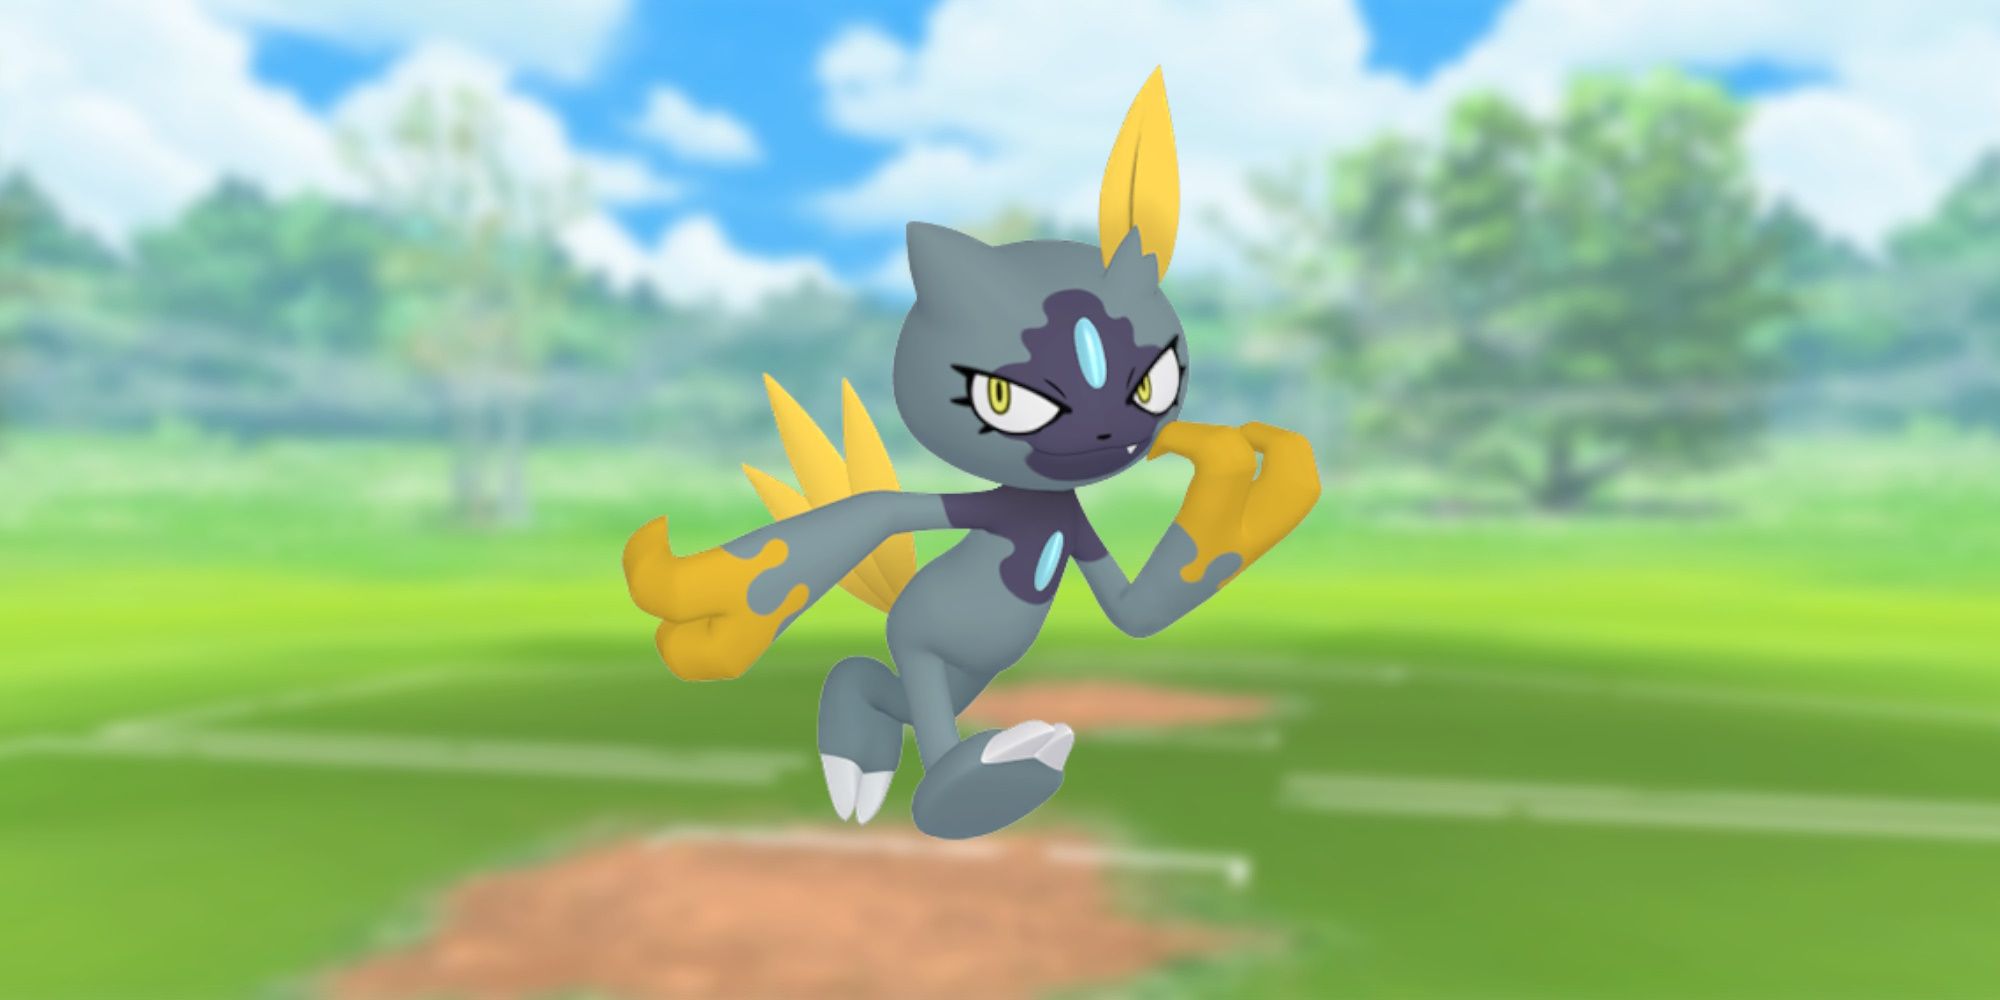 Shiny Hisuian Sneasel from Pokemon with the Pokemon Go battlefield as the background